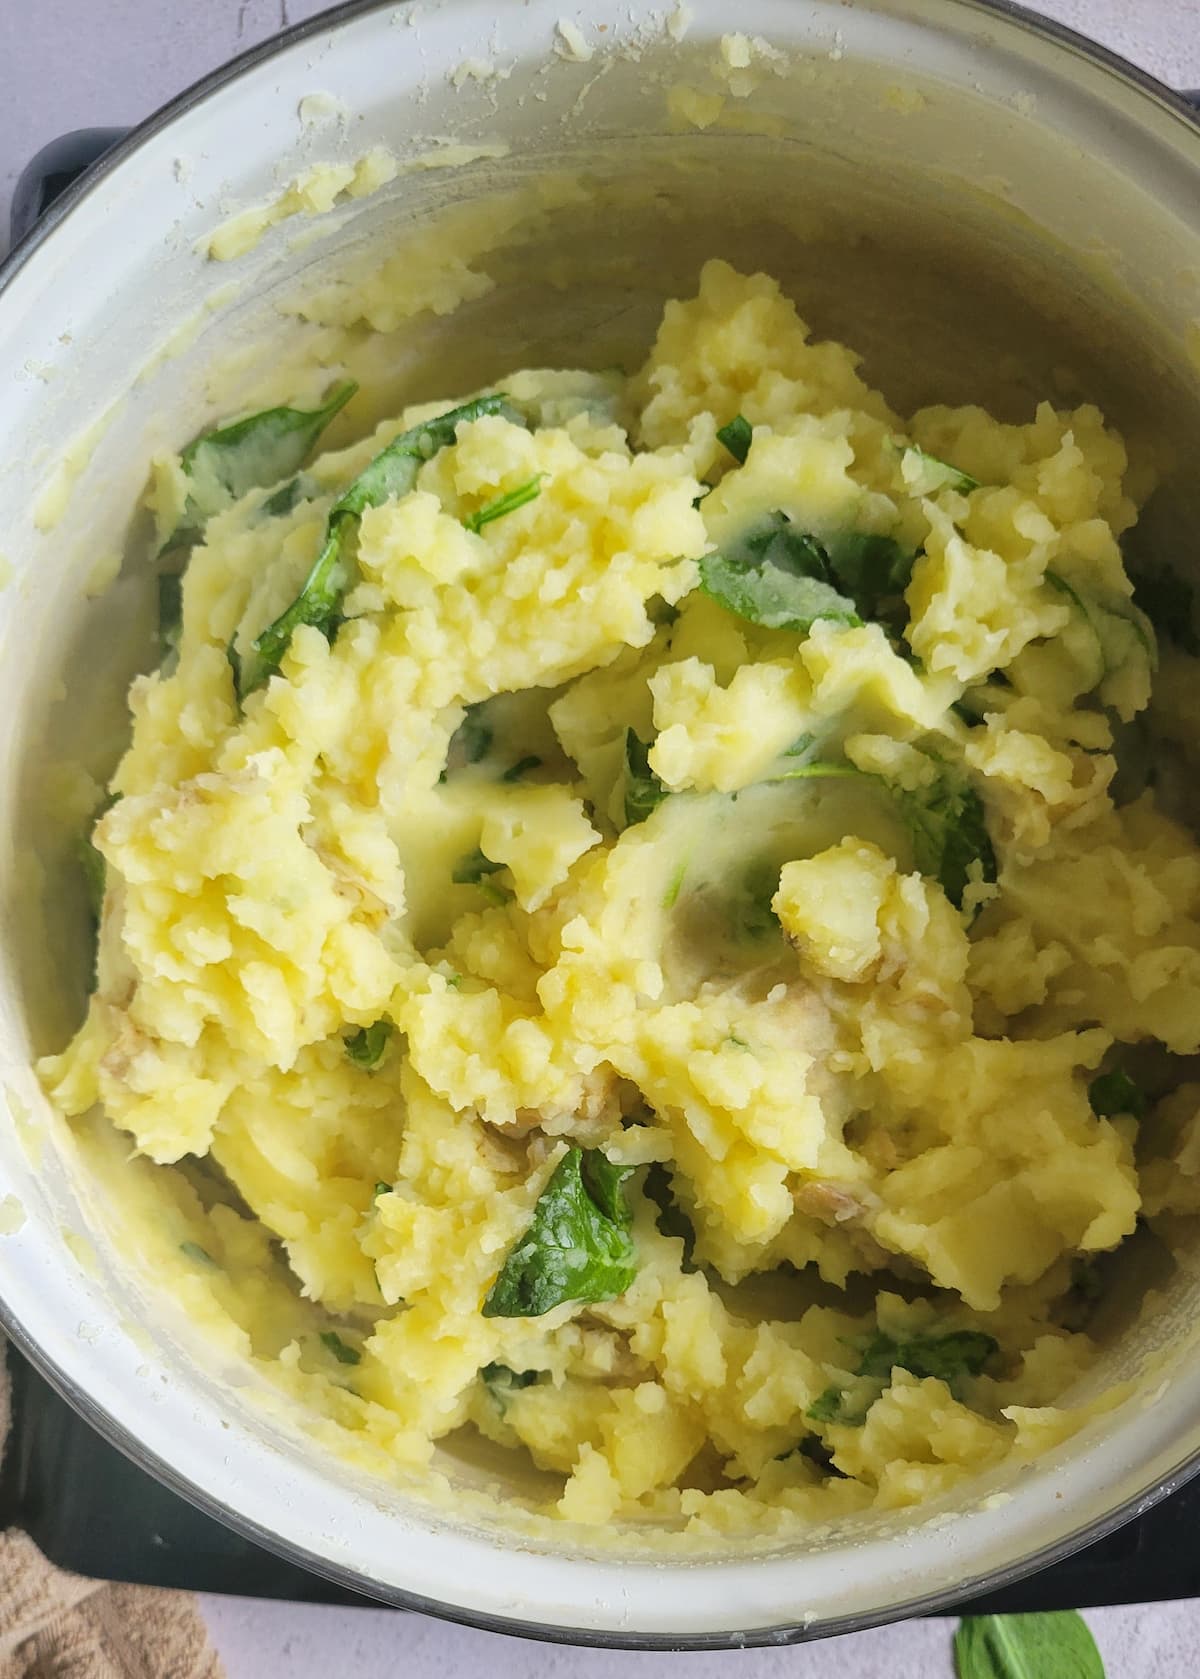 mashed potatoes with spinach in a pot